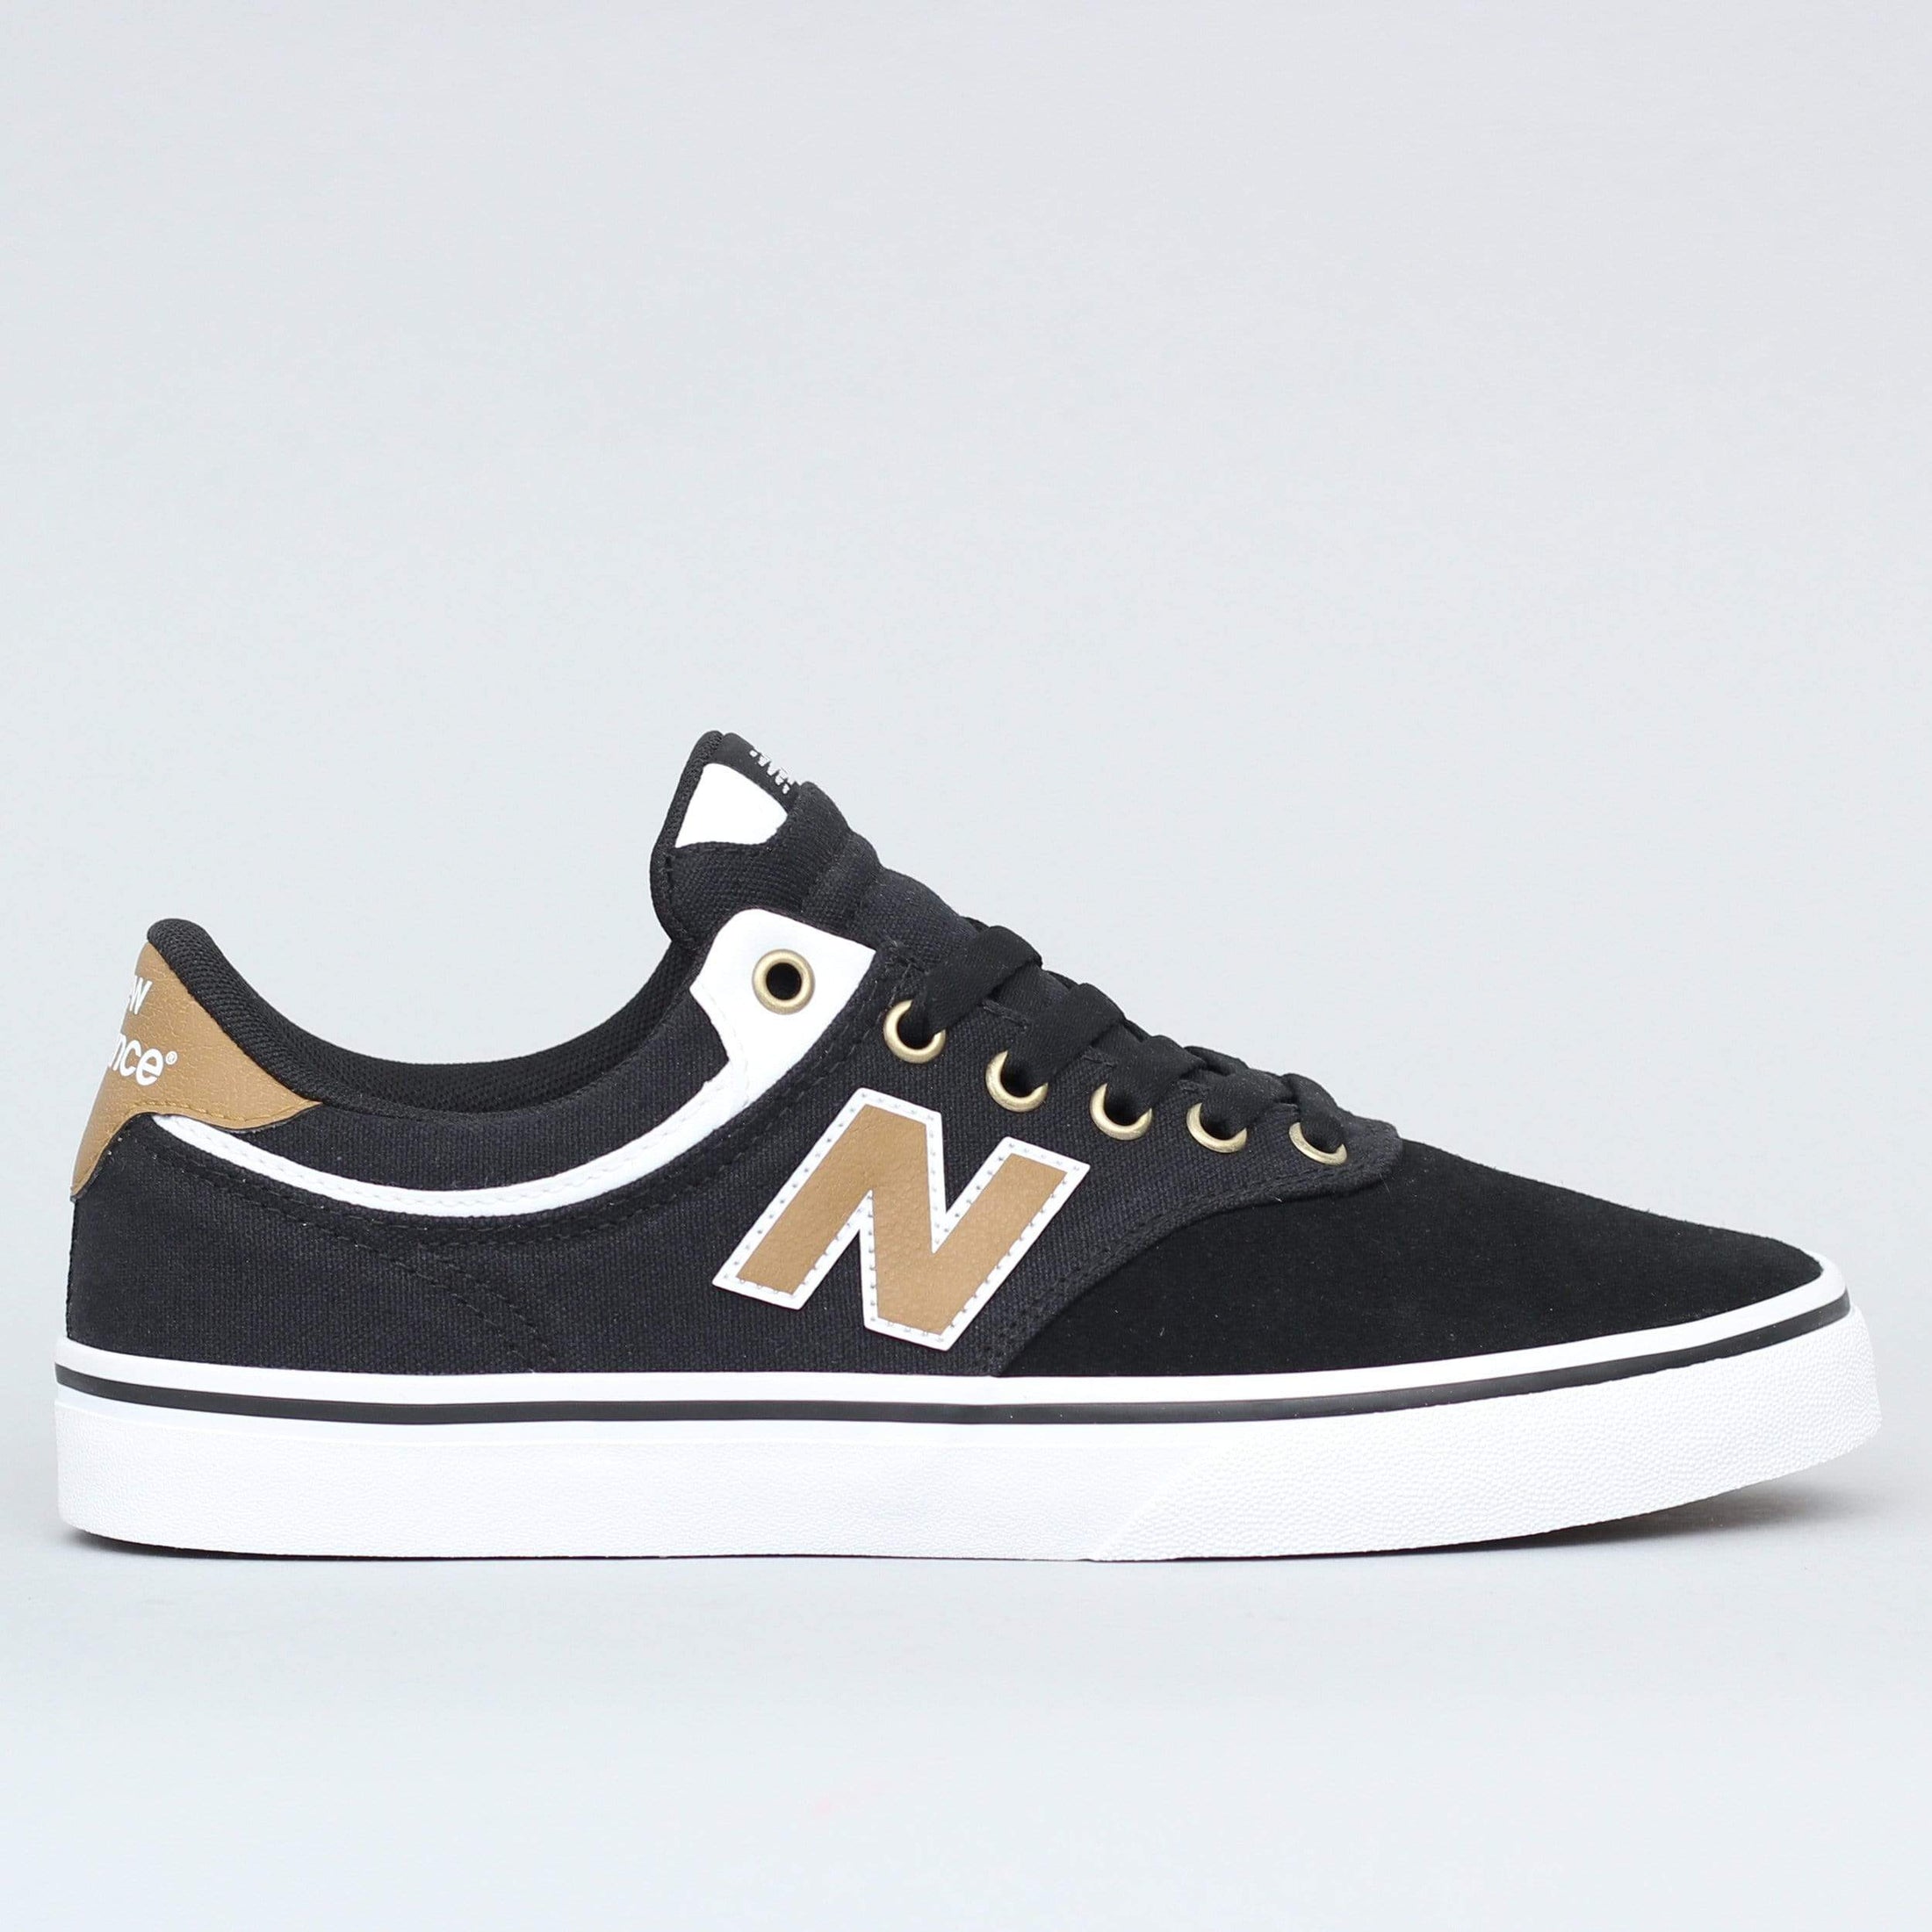 New Balance Numeric 255 Shoes Black / Brown